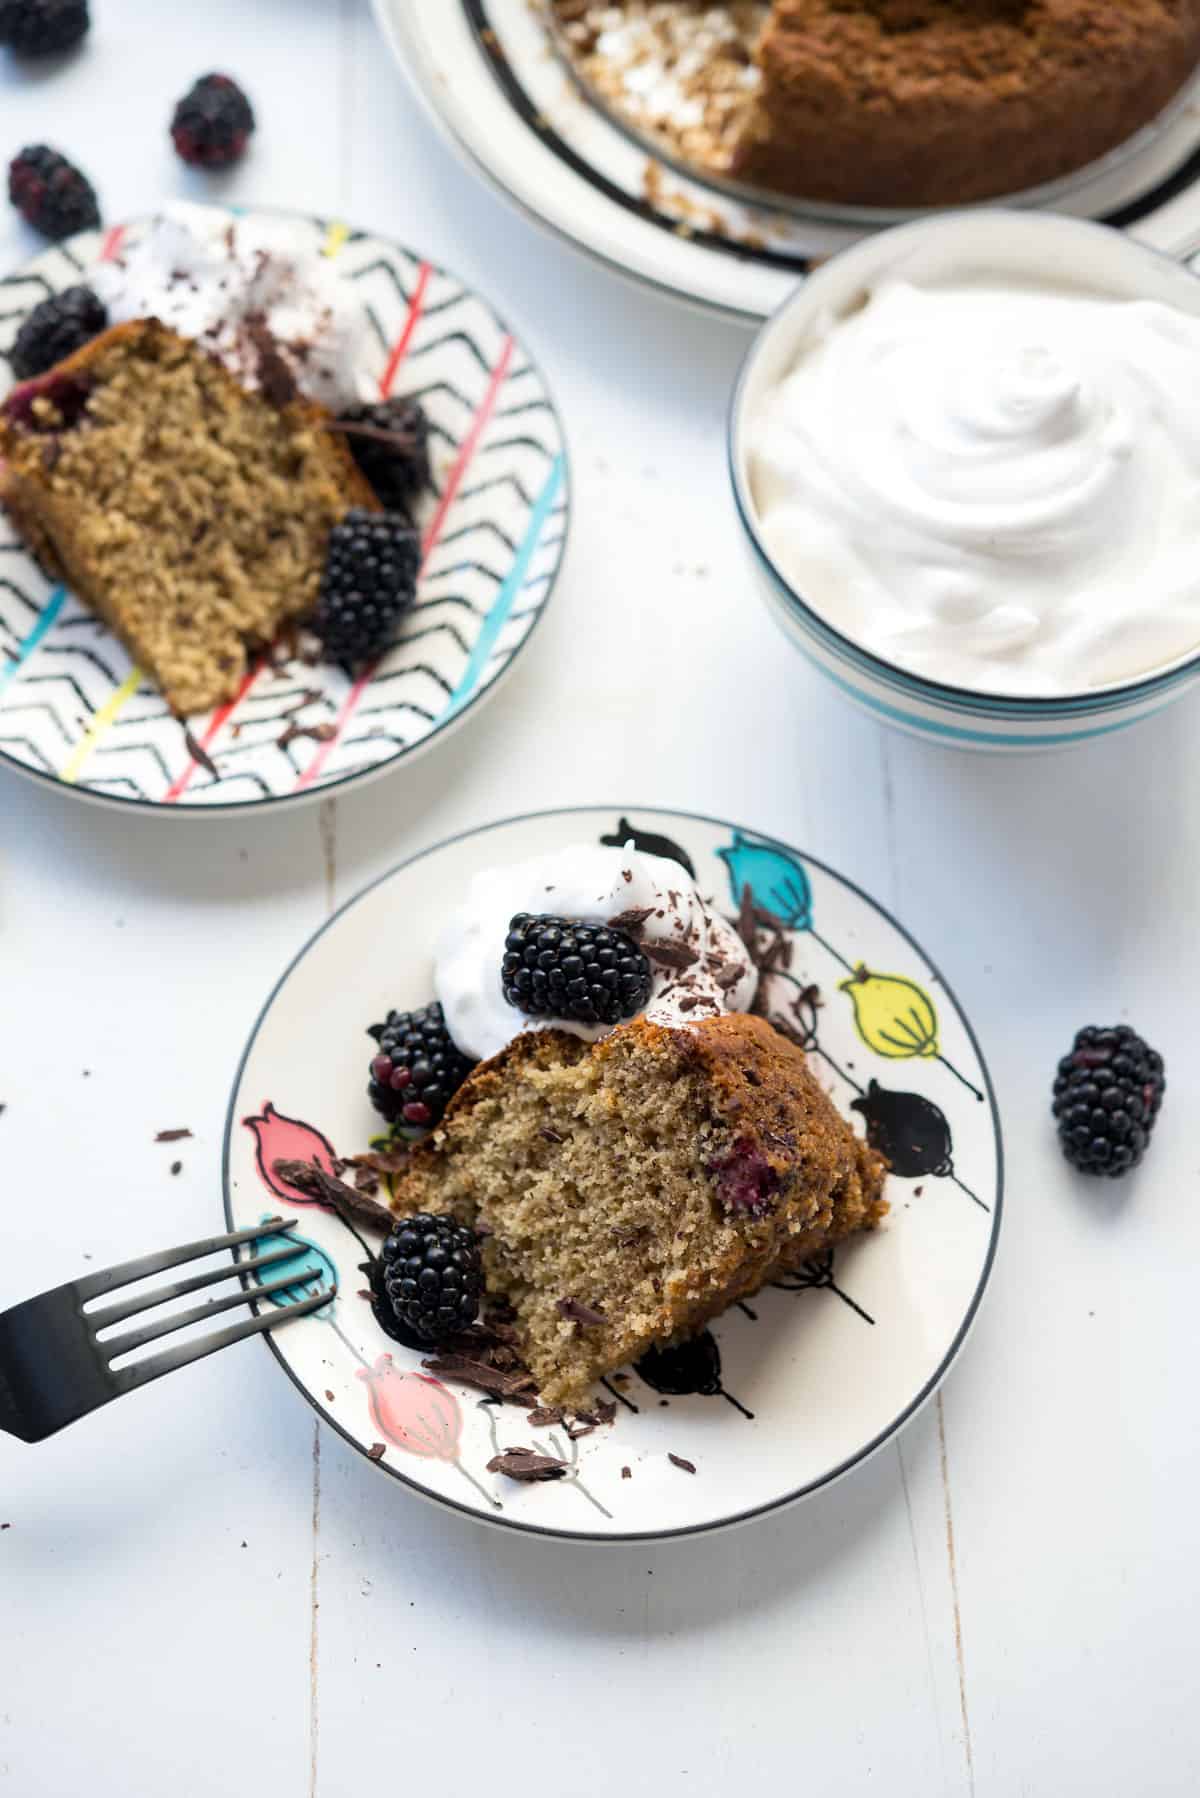 Gluten-free Blackberry Banana Cake with Vegan Whip - Delicious, light, and perfect for Spring! Especially with these cute plates from Lenox